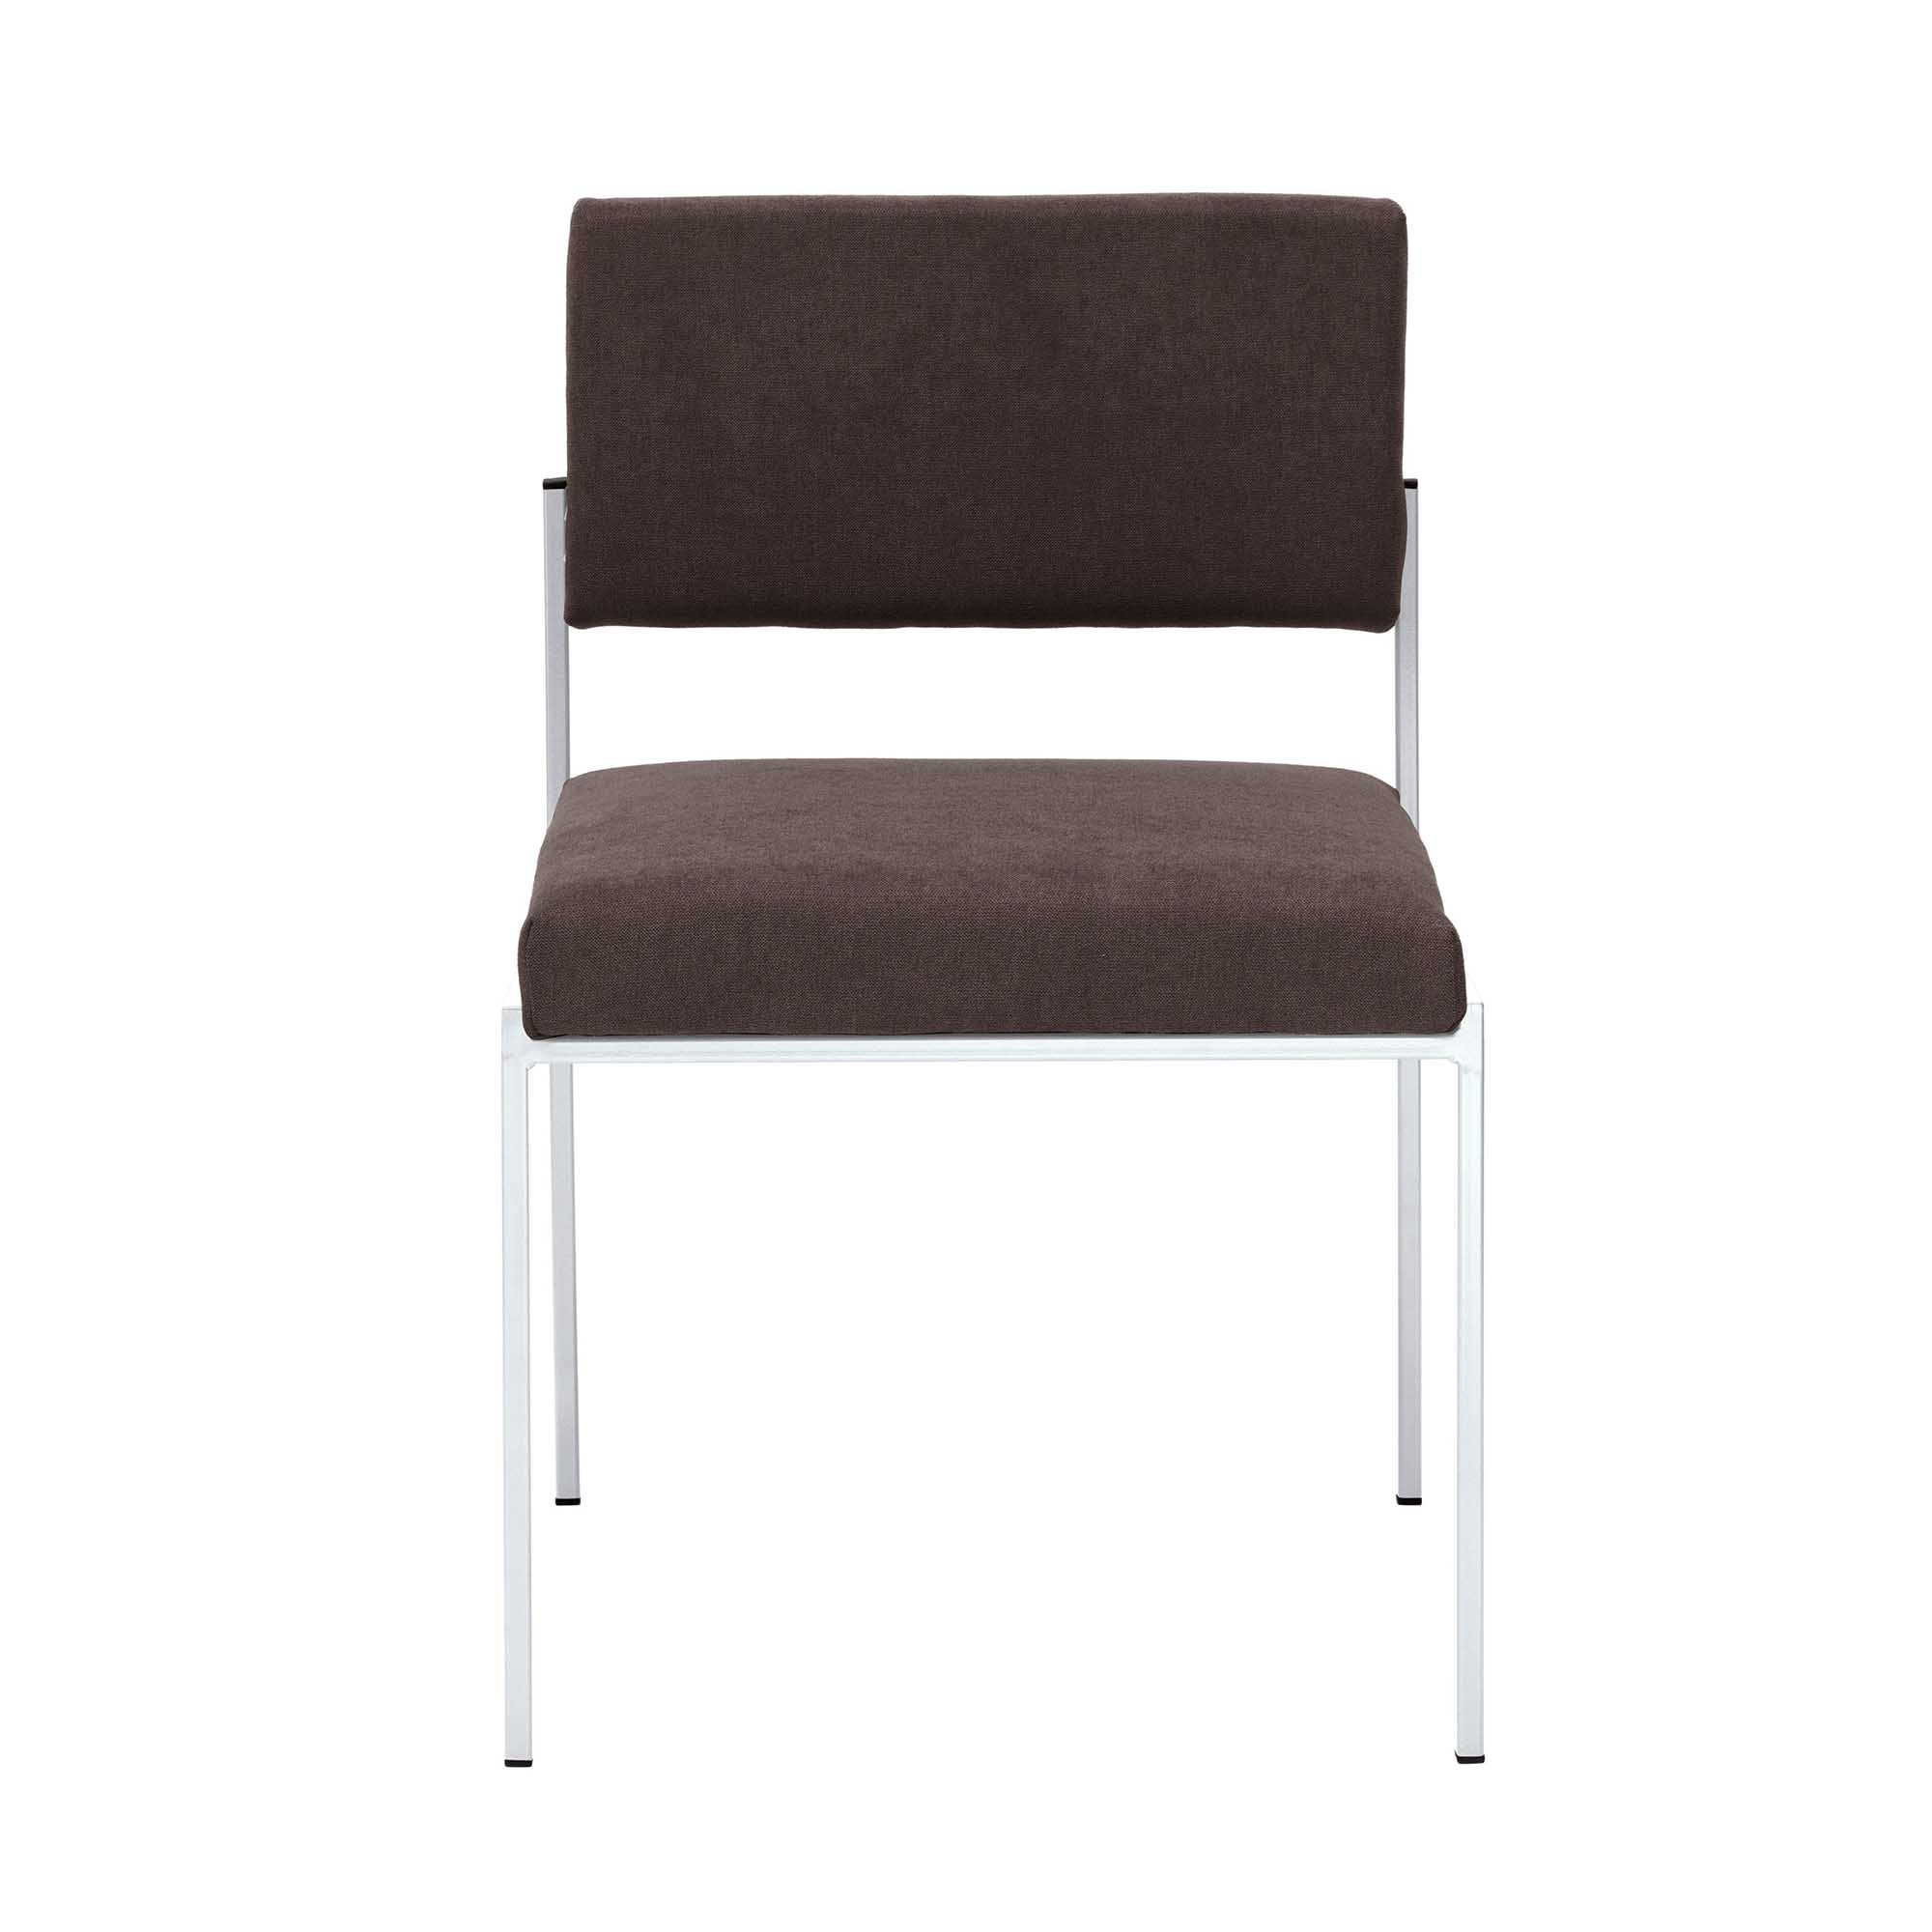  Chair, Powder-Coated Steel Frame brown fabric, white frame, front view